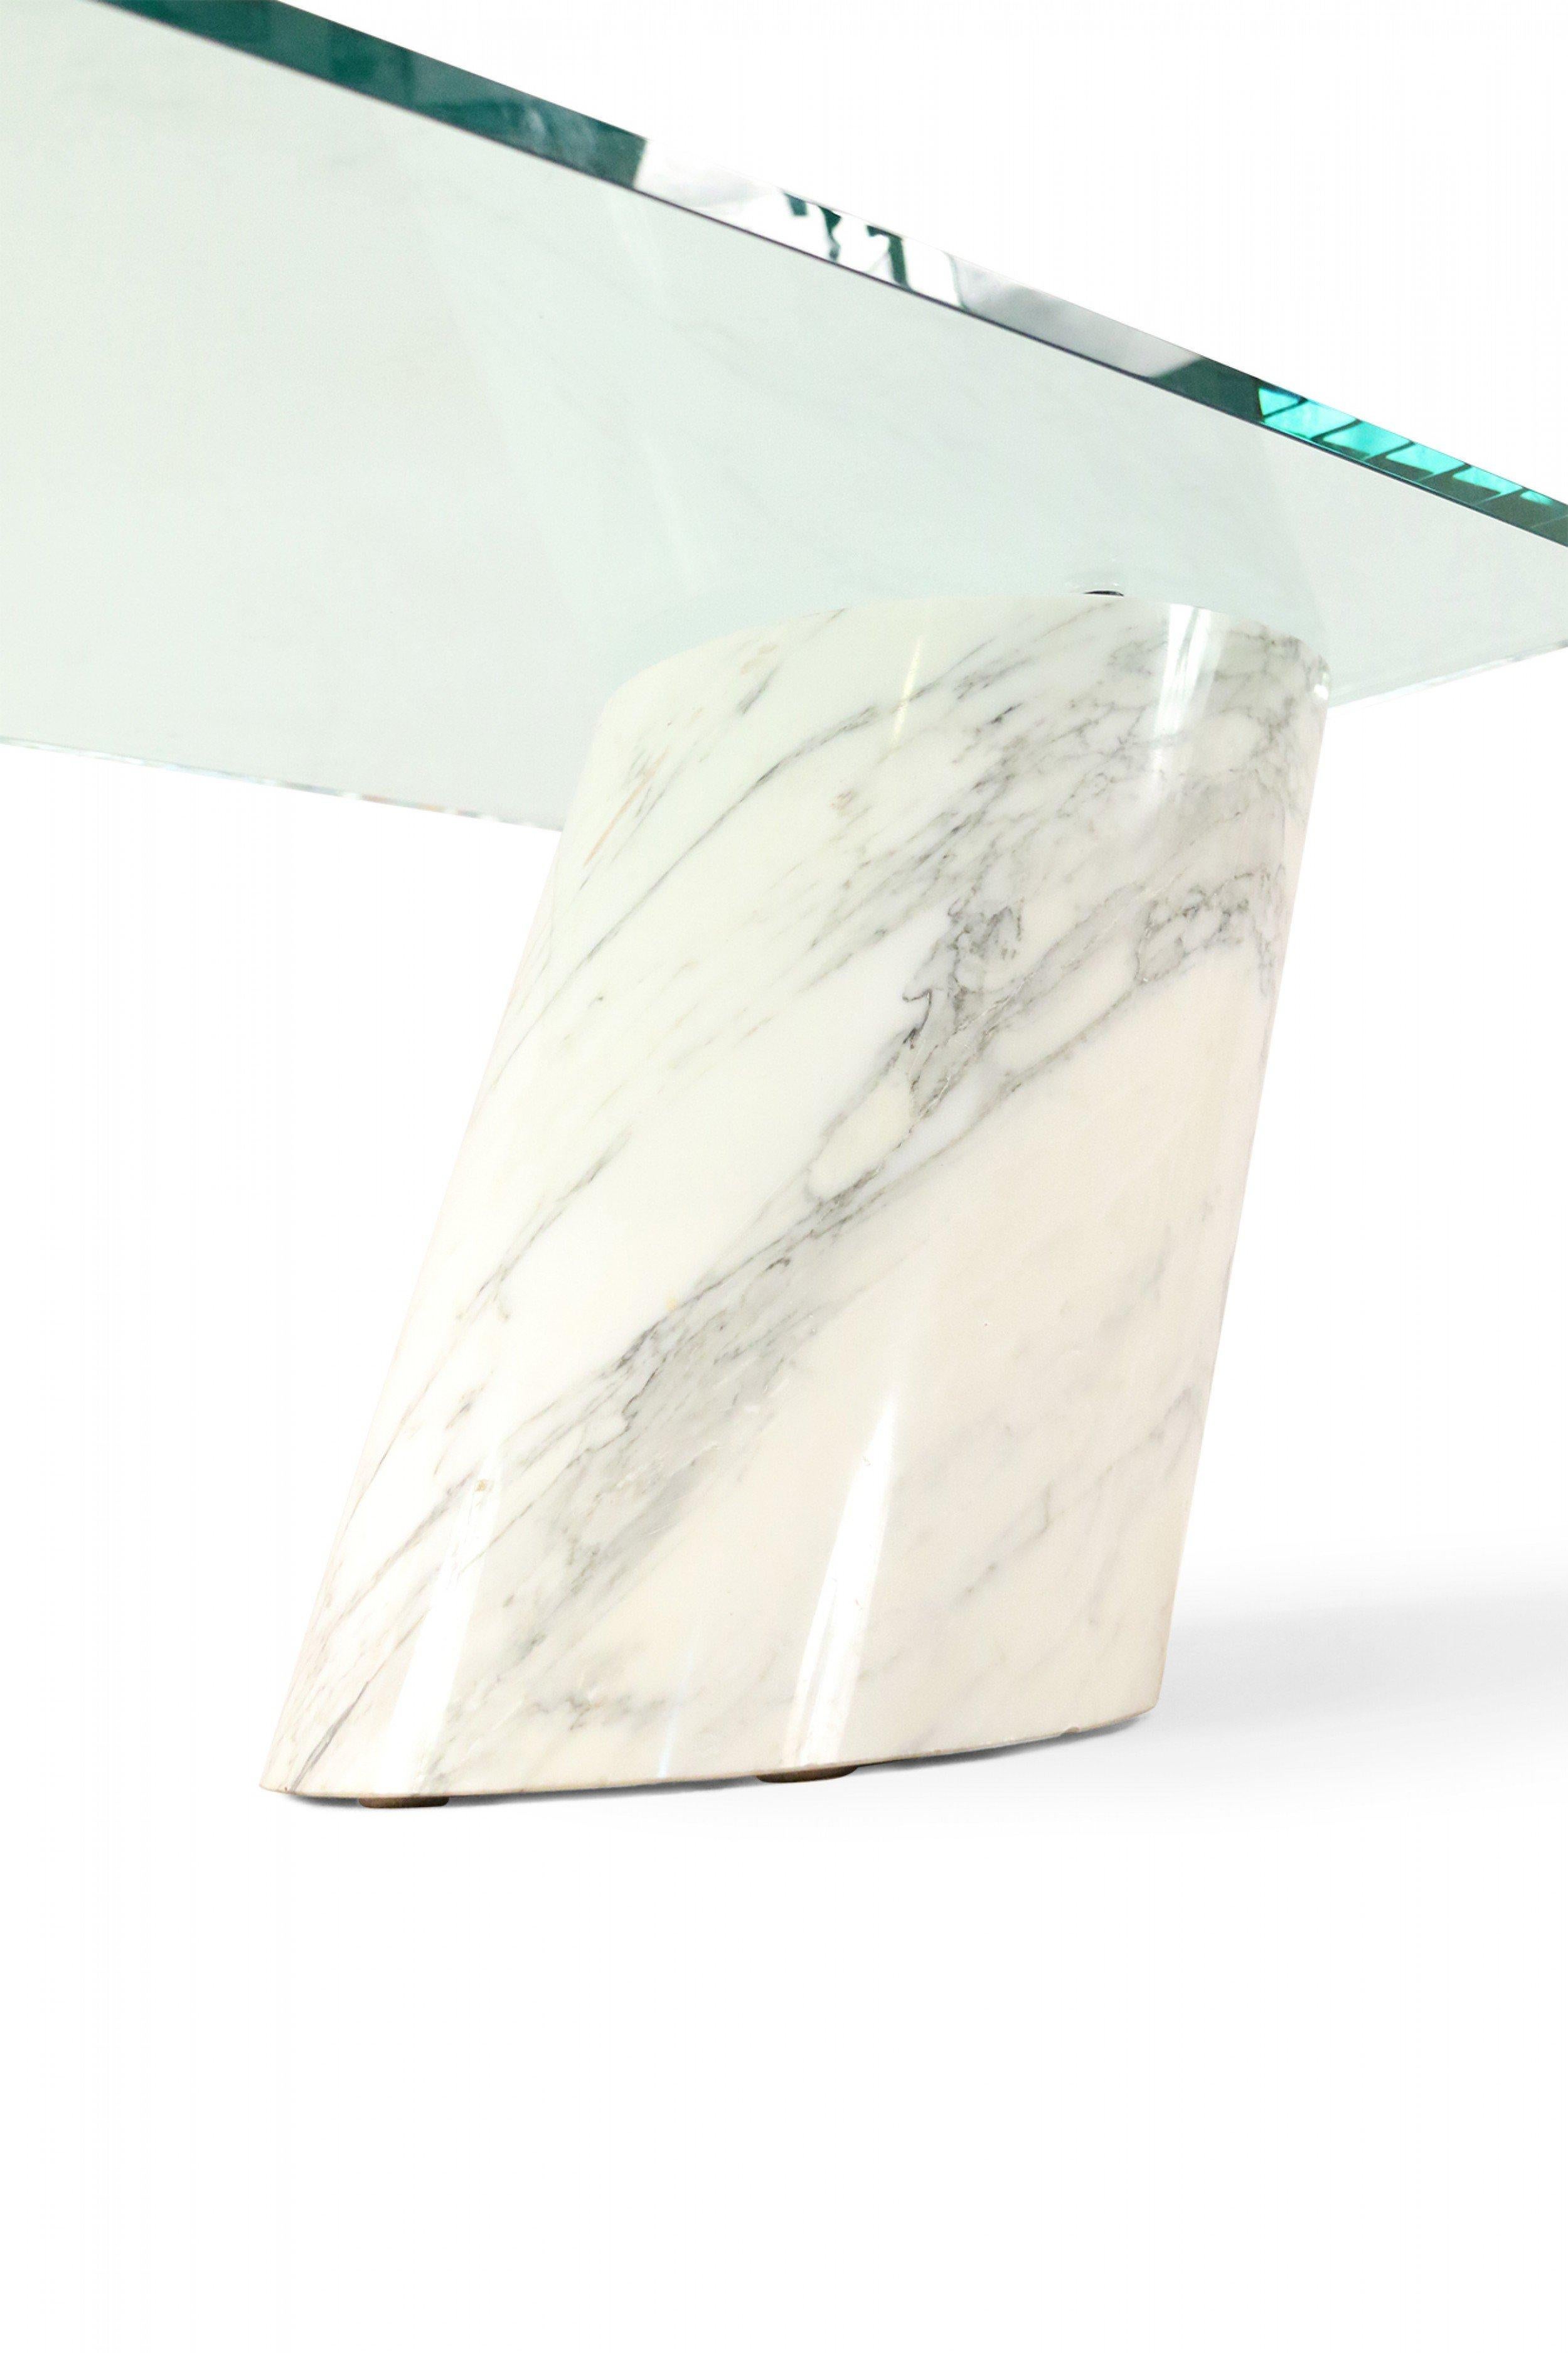 Mid-Century Modern Ronald Schmitt for Brueton White Carrara Marble and Glass Coffee Table For Sale